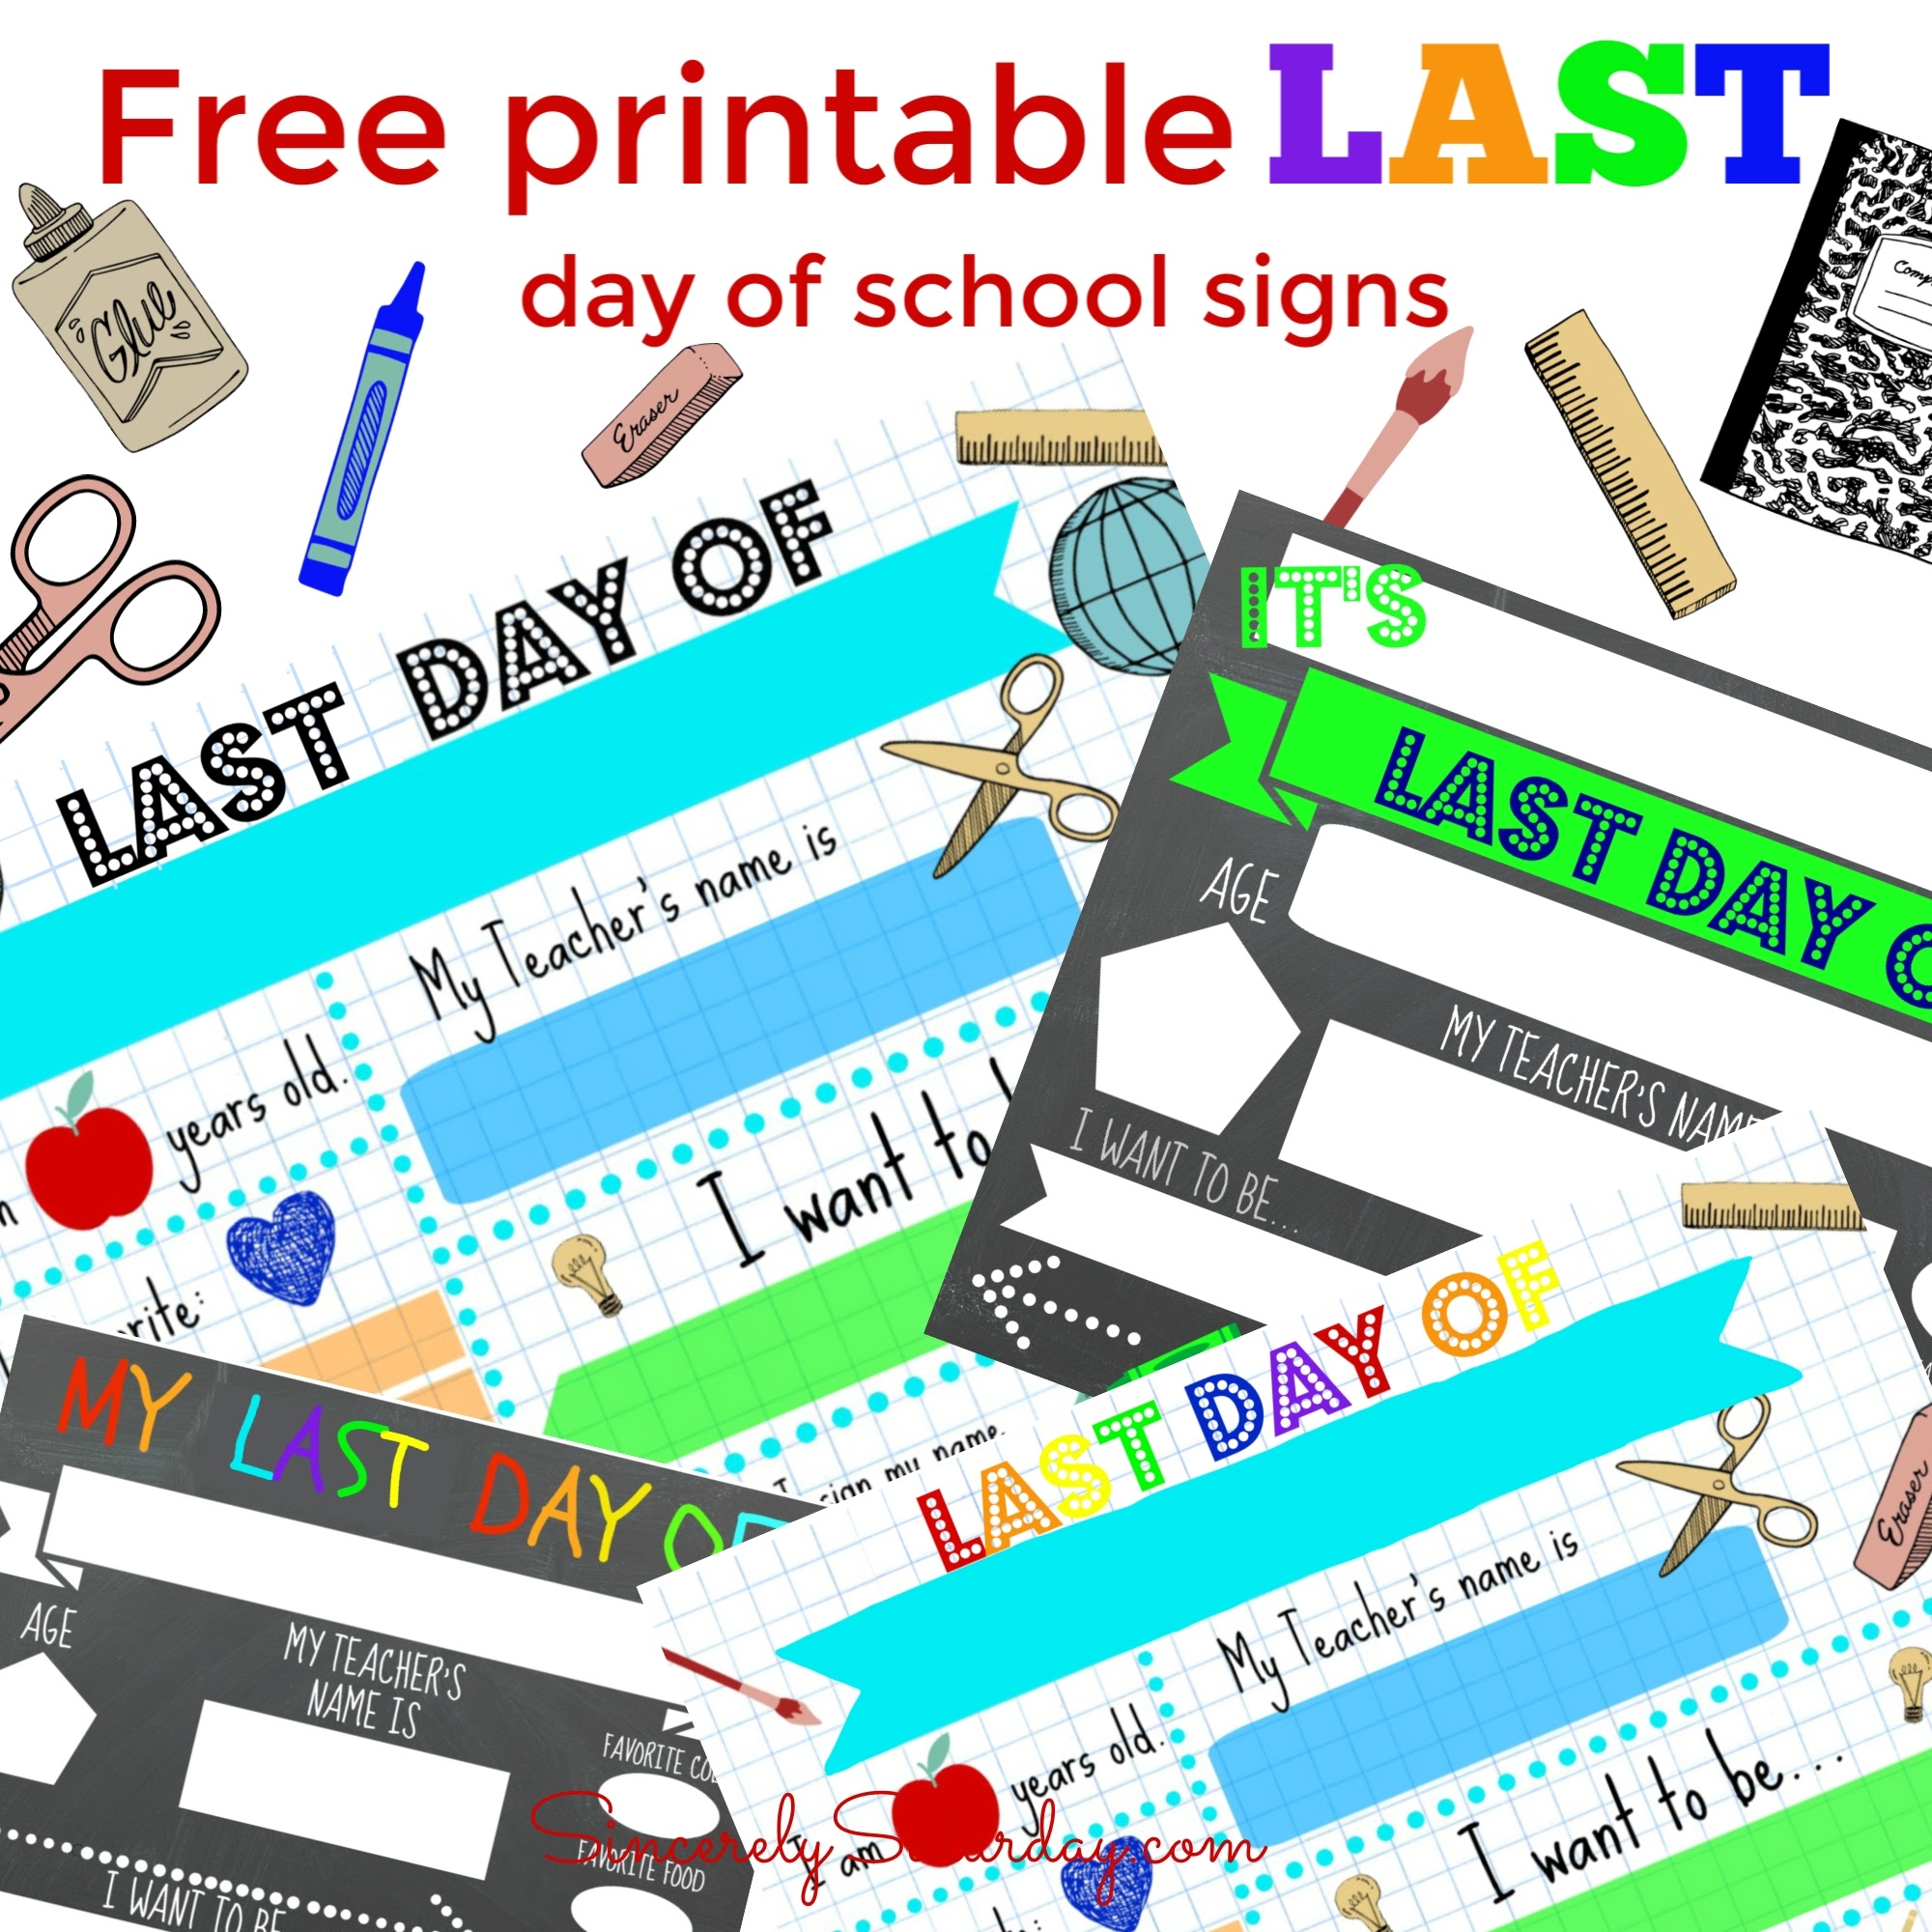 free-printable-last-day-of-school-signs-sincerely-saturday